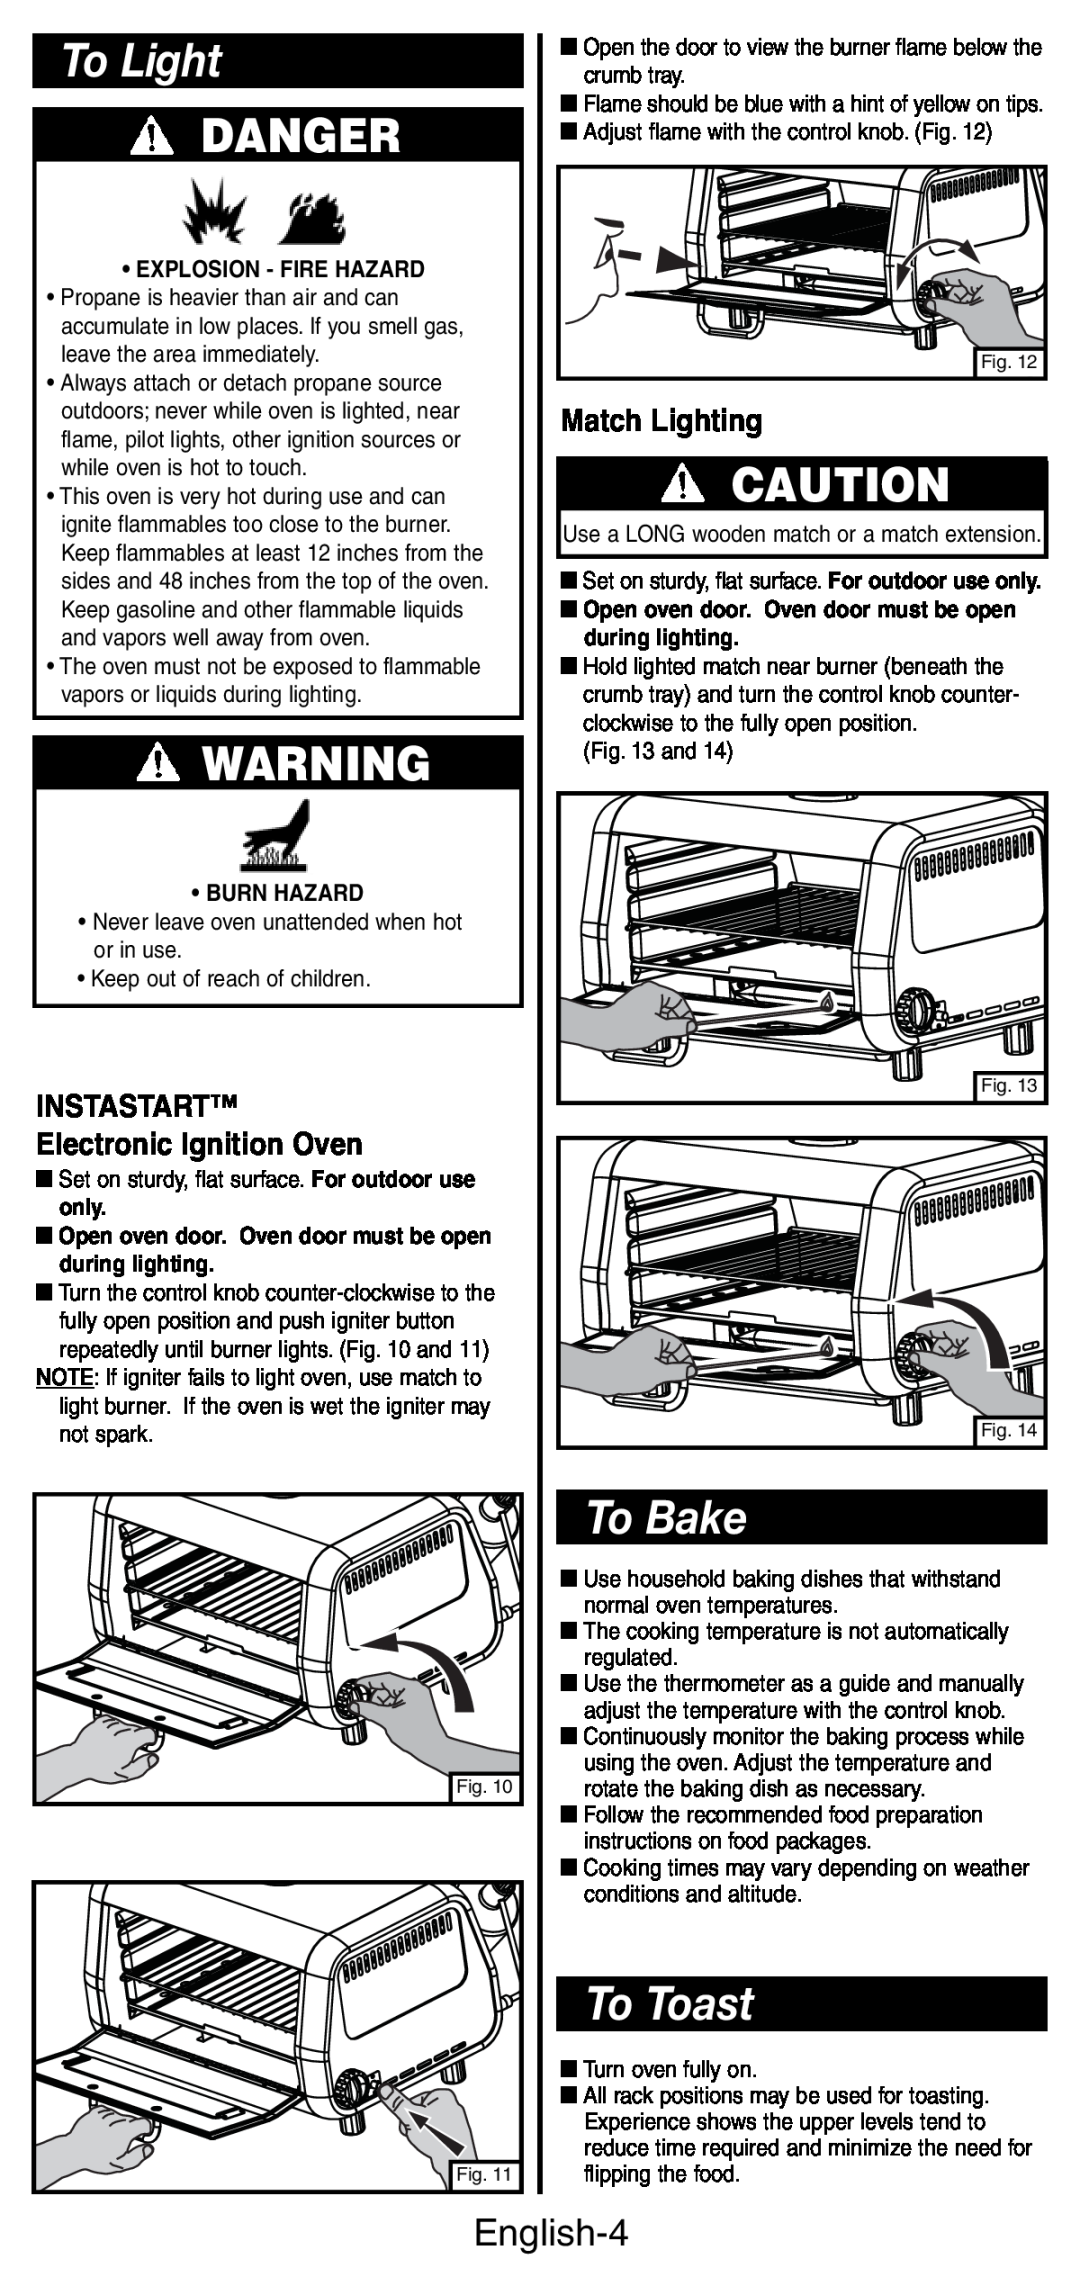 Coleman 9927 manual To Light, To Bake, To Toast, Danger, English-4, INSTASTART Electronic Ignition Oven, Match Lighting 